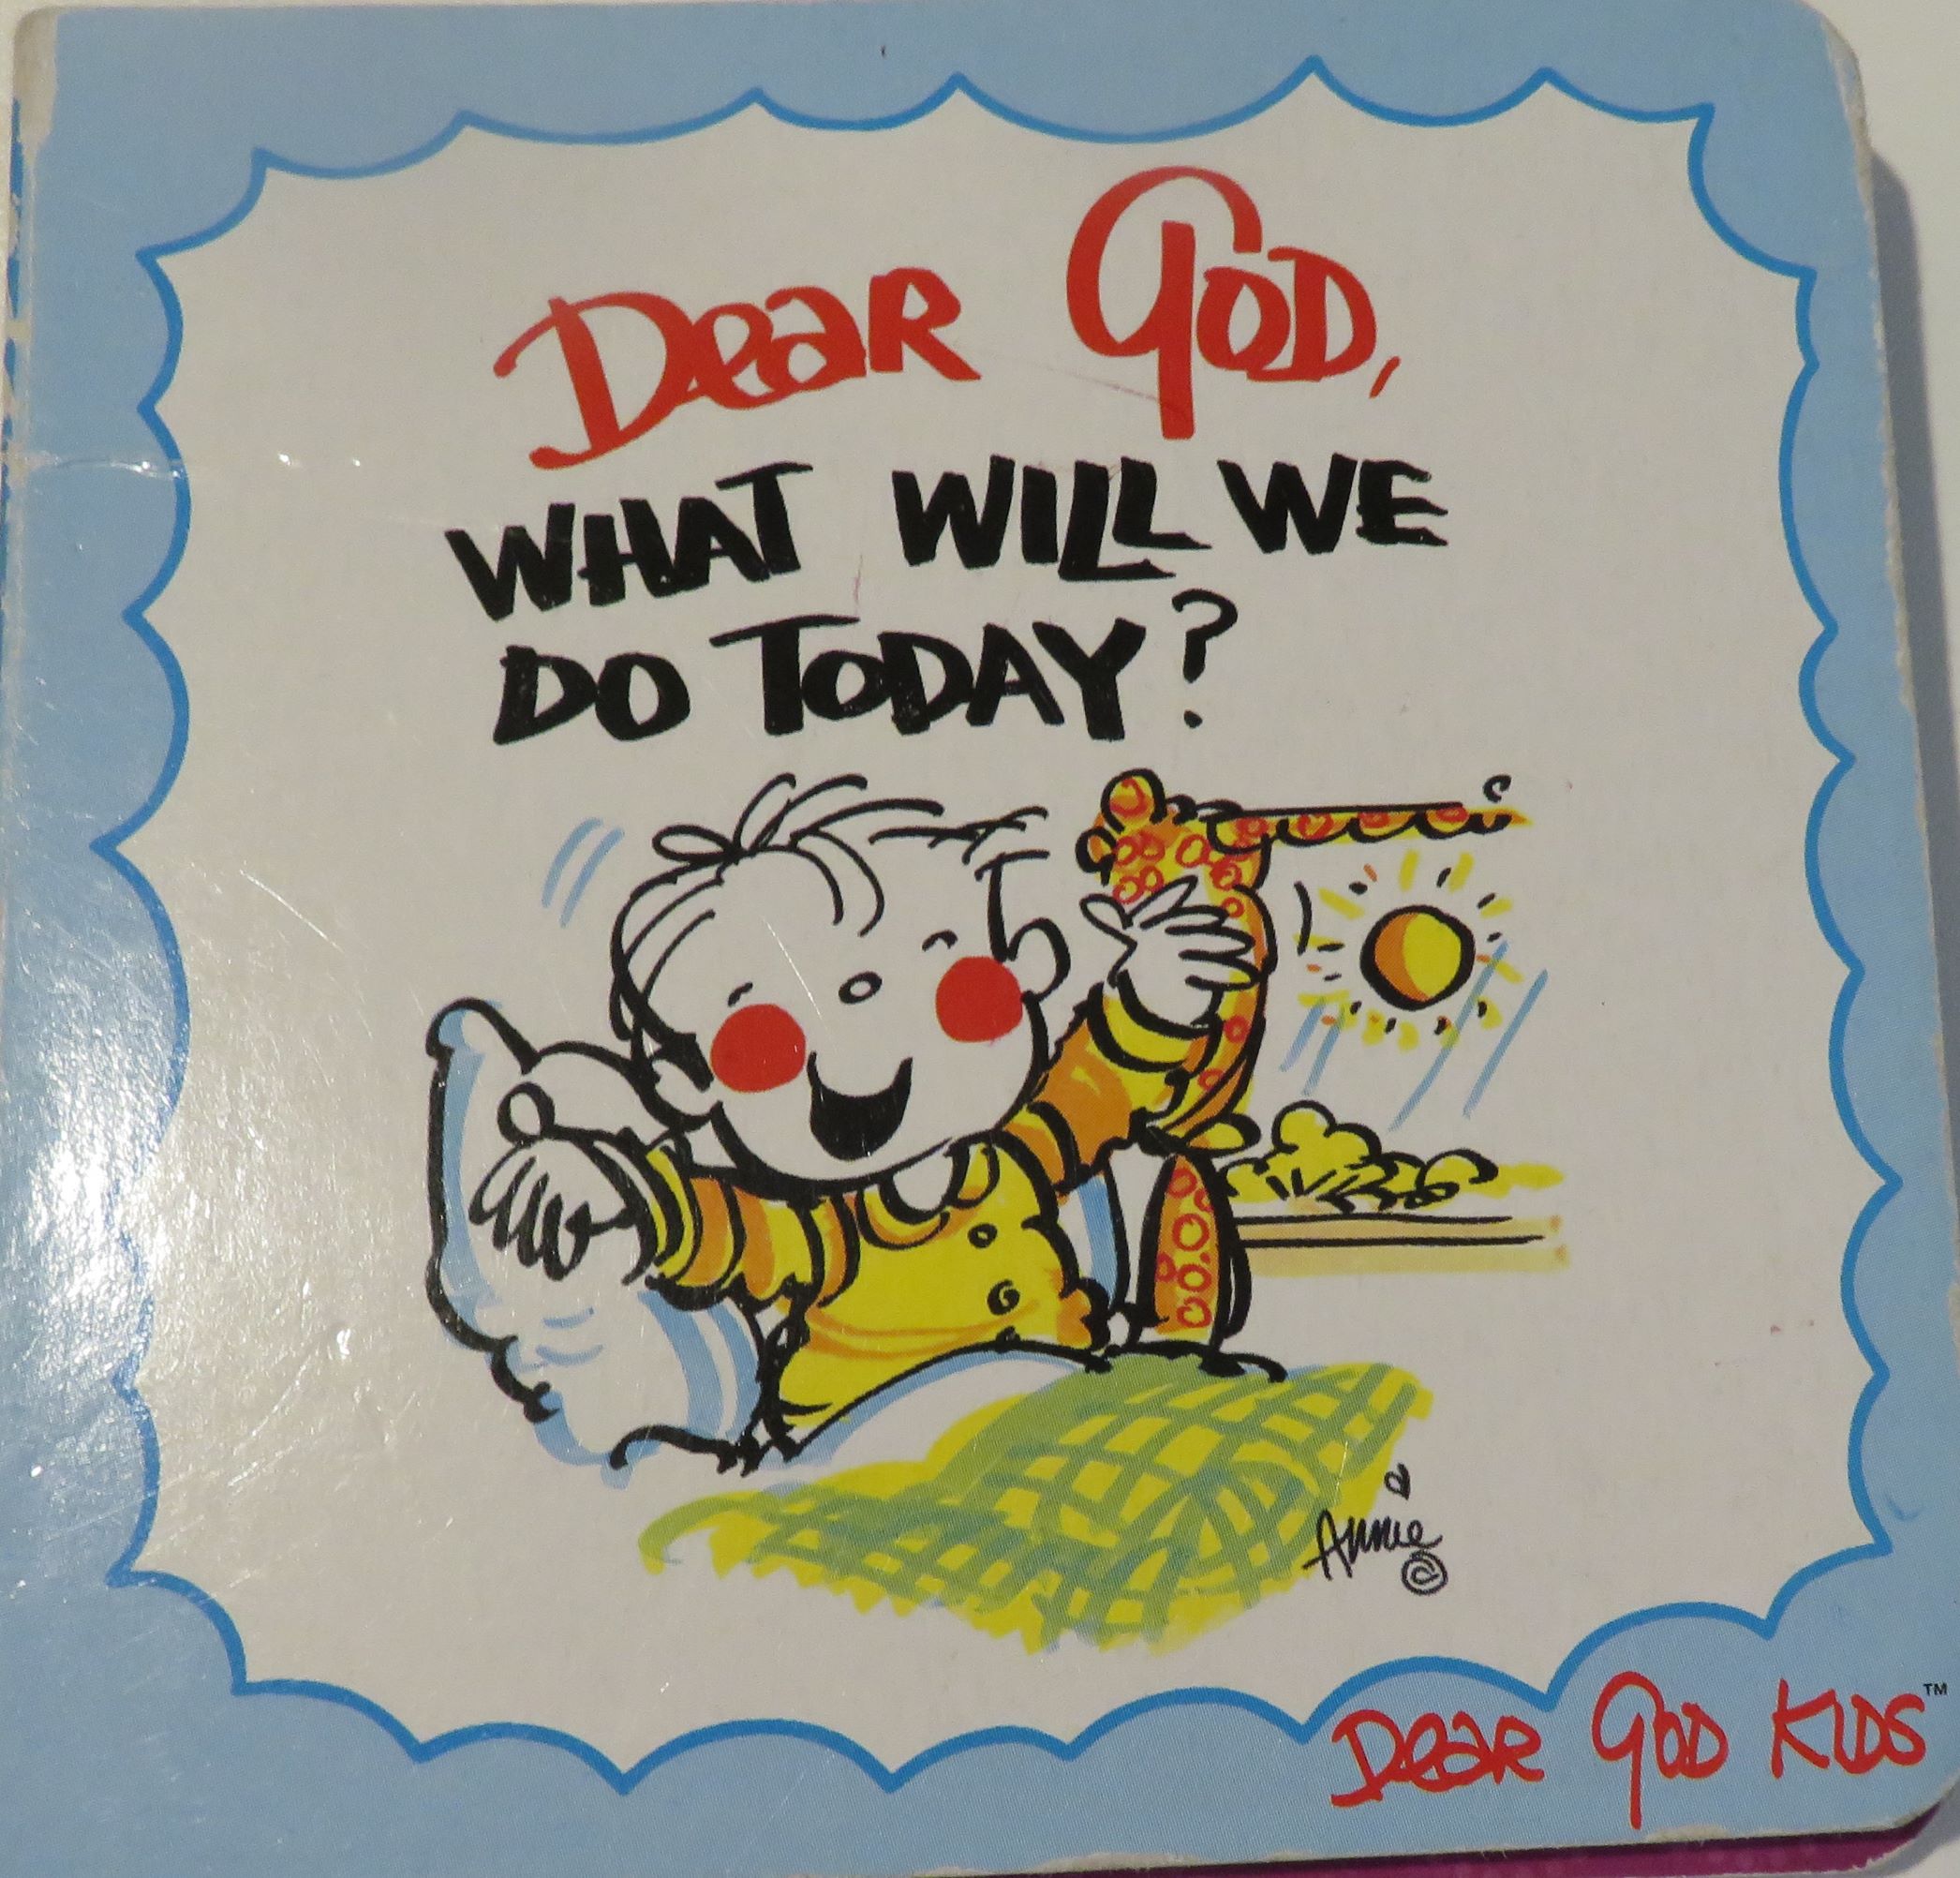 Dear God, What Will We Do Today?